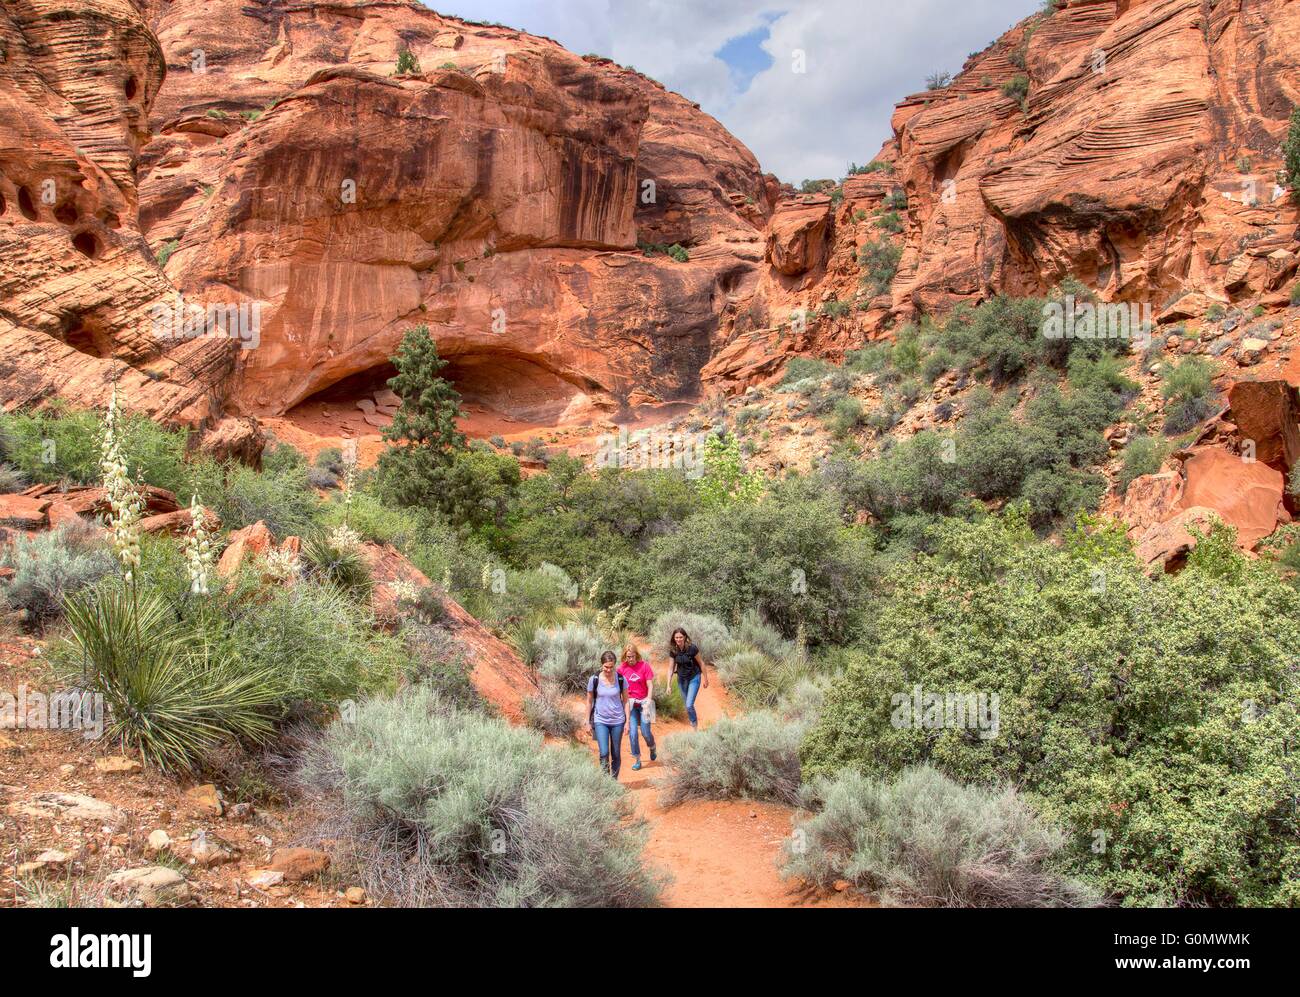 Hikers make their way through the rock hills and desert at the Red Cliffs National Conservation Area where the Colorado Plateau, Great Basin Desert, and Mojave Desert overlap near St. George, Utah. Stock Photo